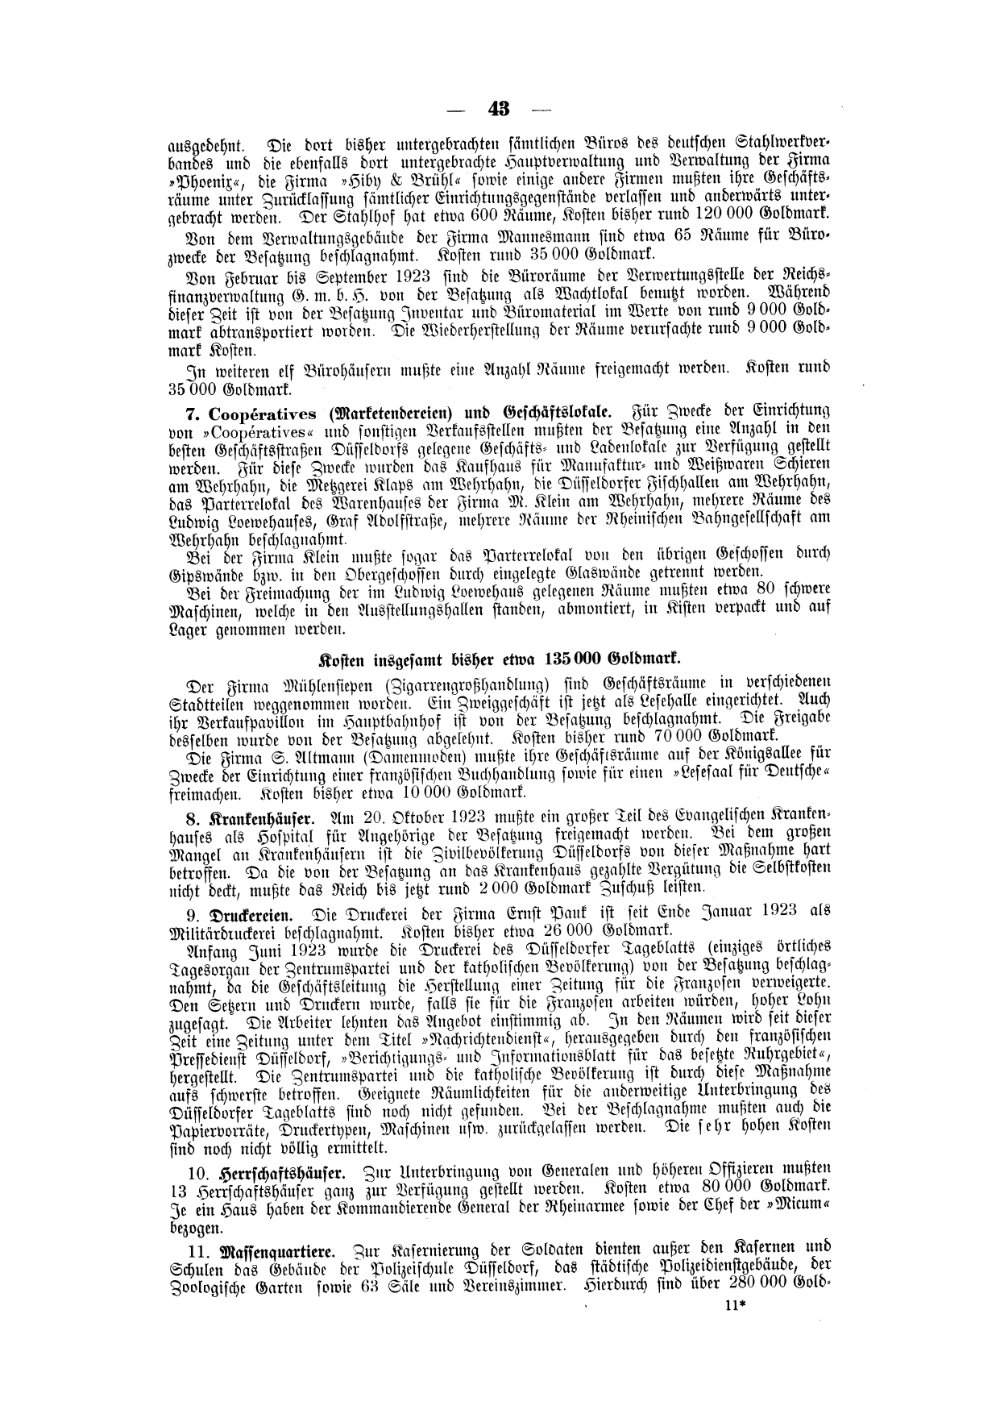 Scan of page 43